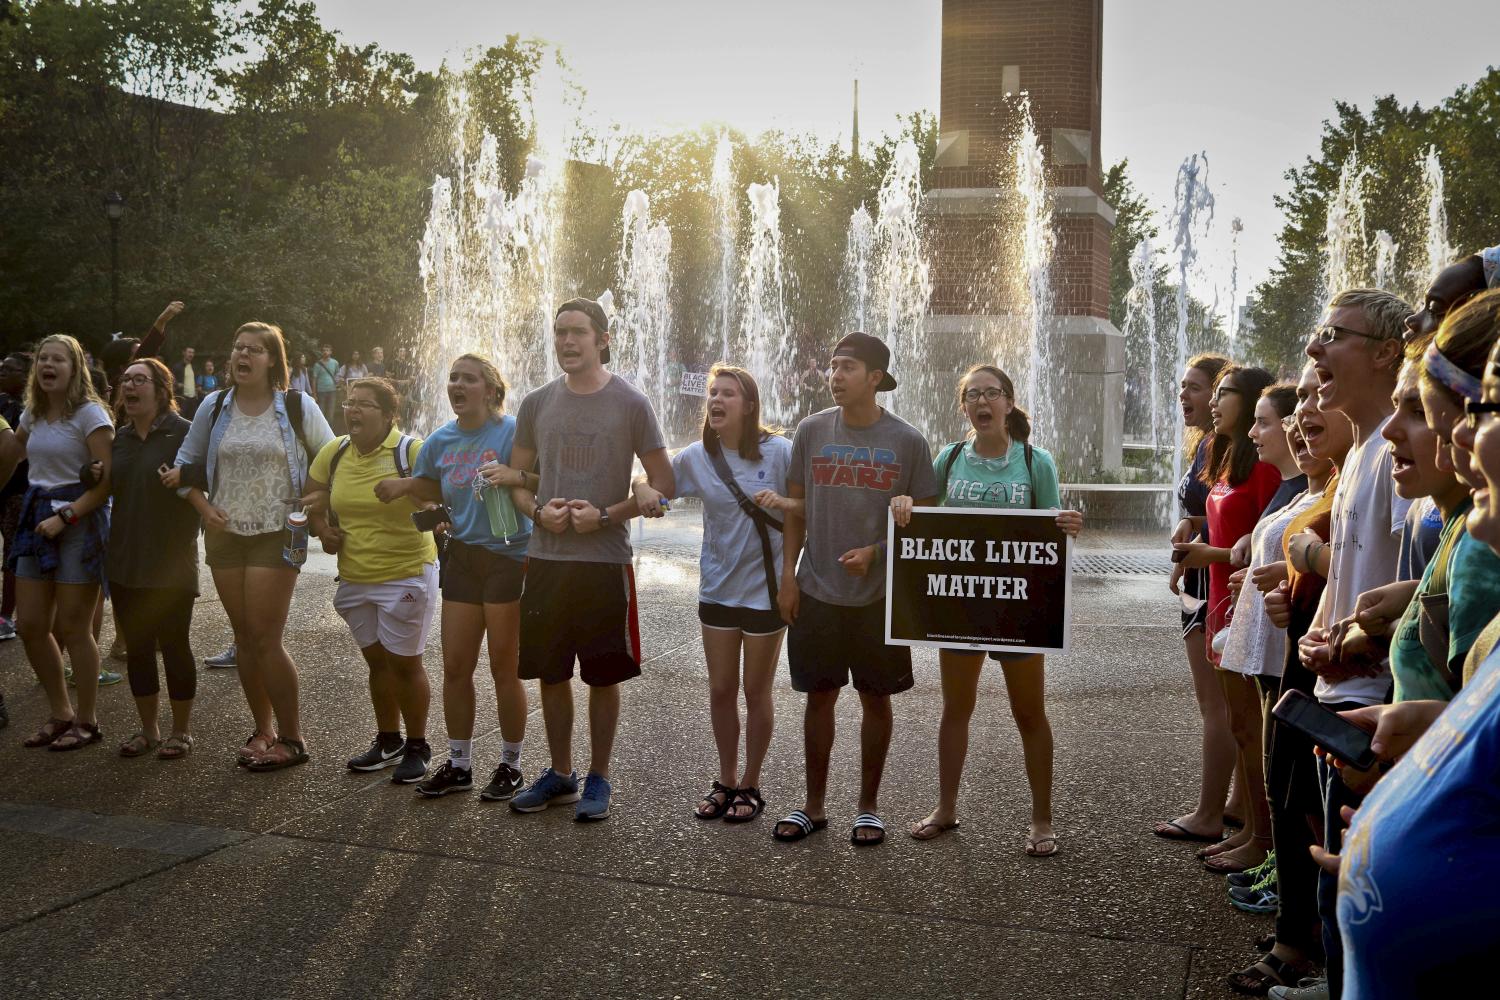 SLU students gather around the clock tower to voice their dissent in reaction to the not-guilty verdict in the trial of former St. Louis police officer Jason Stockley.